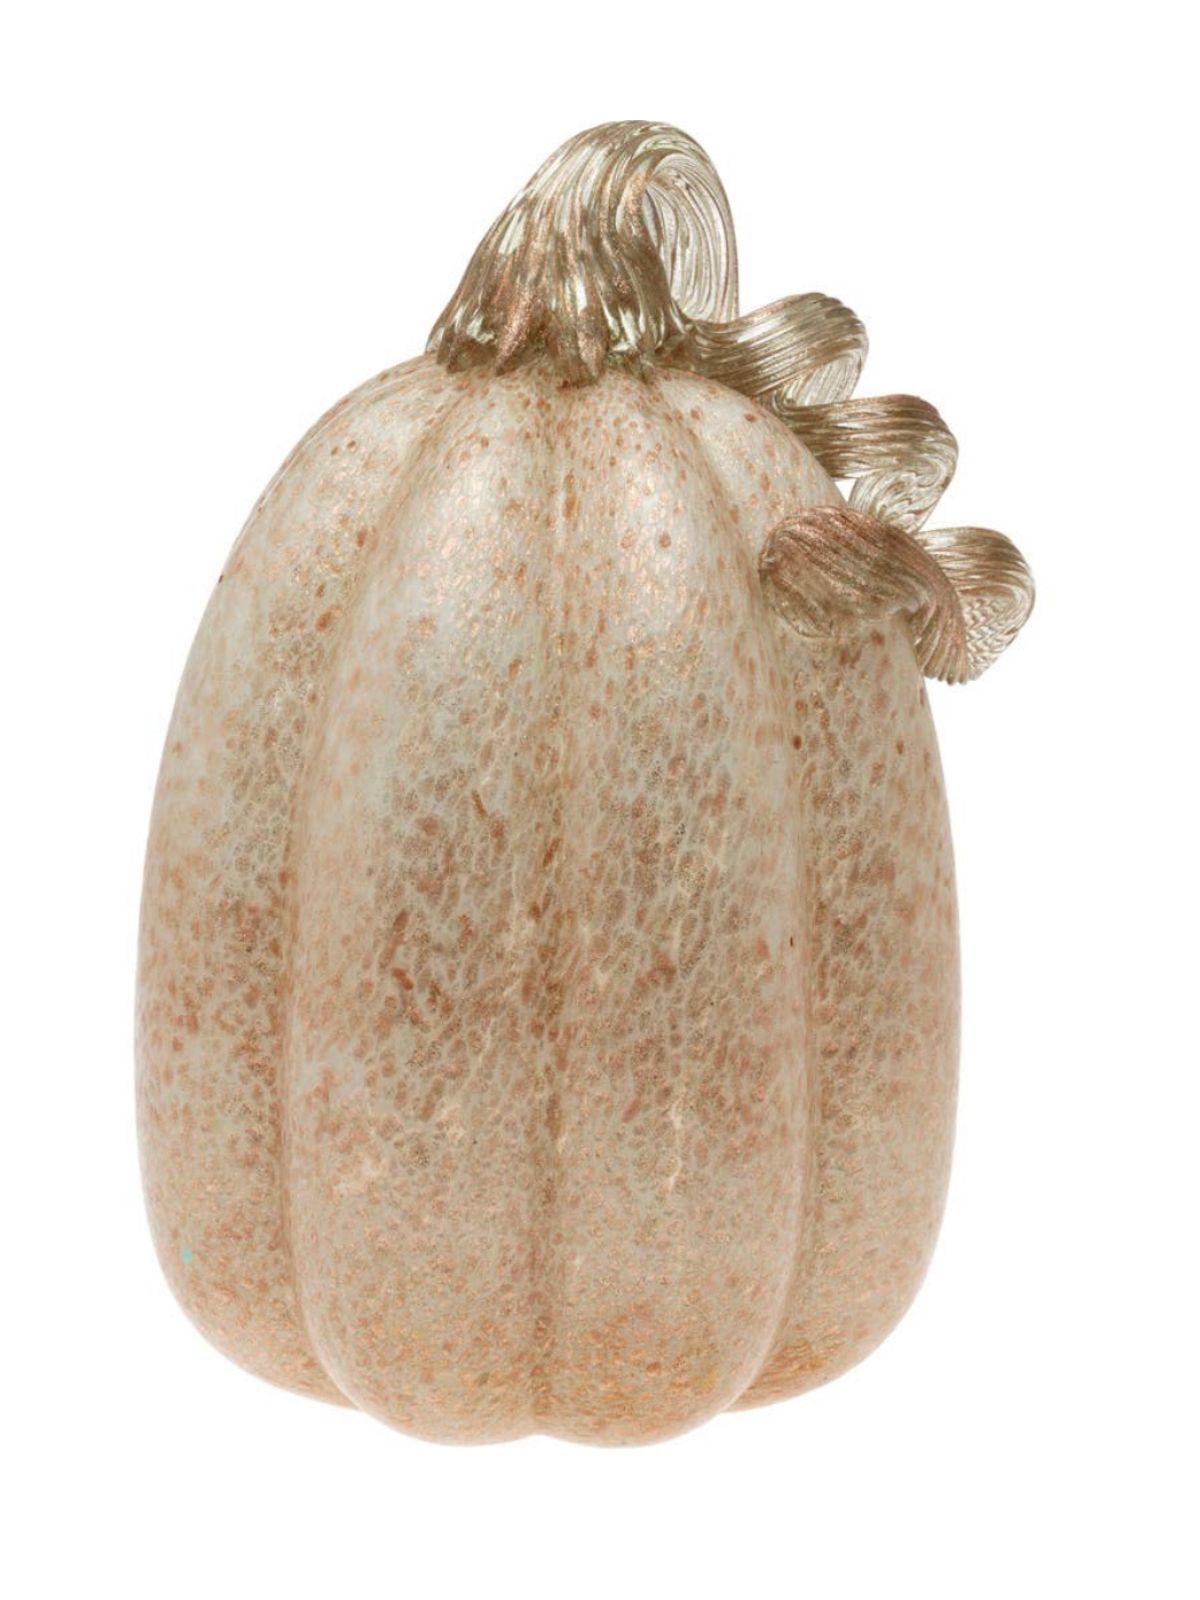 Add elegance to your fall decor with these gorgeous handcrafted glass pumpkins. This classic seasonal accent has a champagne color with a gold stem! A pretty pumpkin palette for your fall dining and decor.